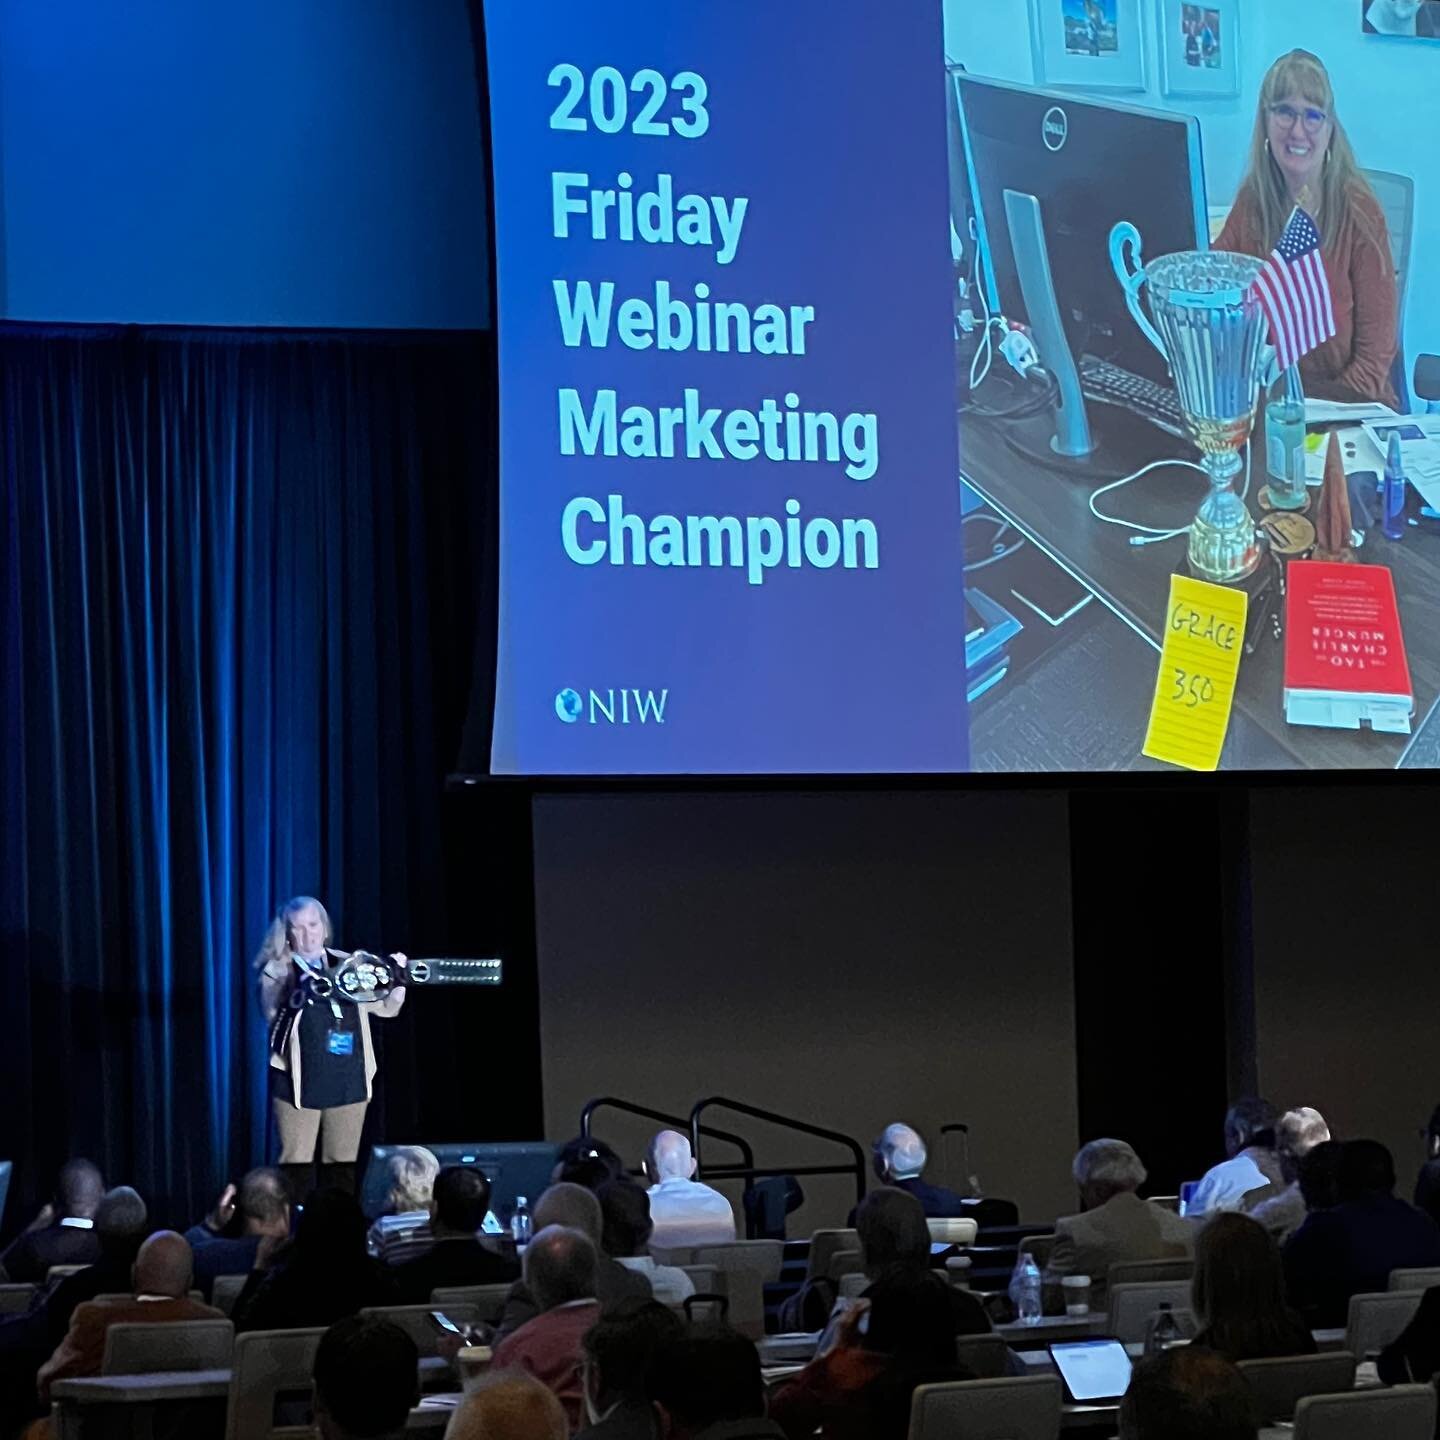 📣 A heartfelt THANK YOU to everyone who attended the 2023 NIW University event!
&nbsp;
What an incredible gathering of bright minds, innovative thinkers, and enthusiastic learners it was. This year, we had an opportunity to introduce you to the wond